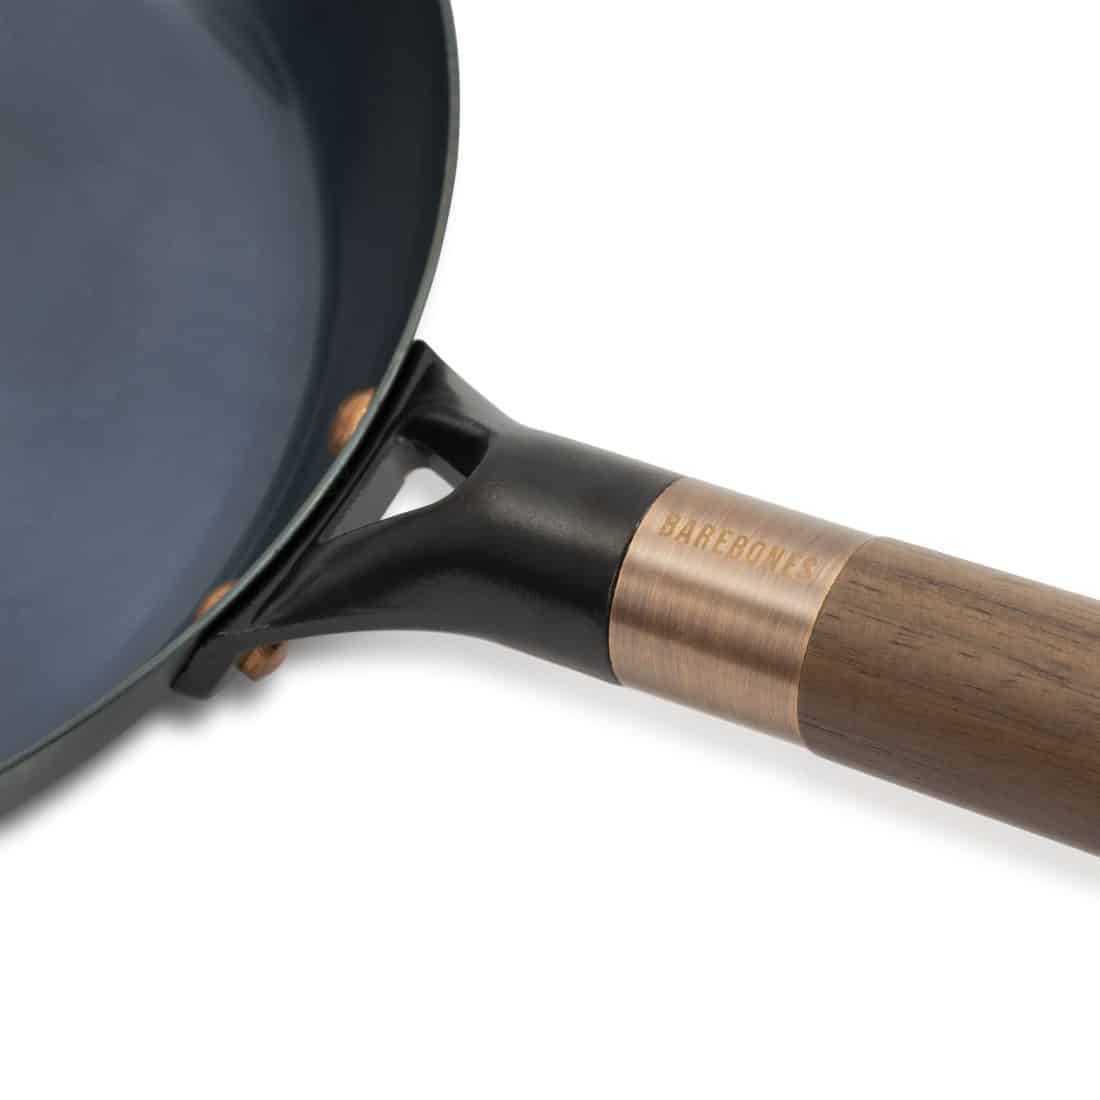 Barebones 12-Inch Flat Cast Iron Skillet - Enameled Cast Iron Fry Pan,  outdoor cooking pan